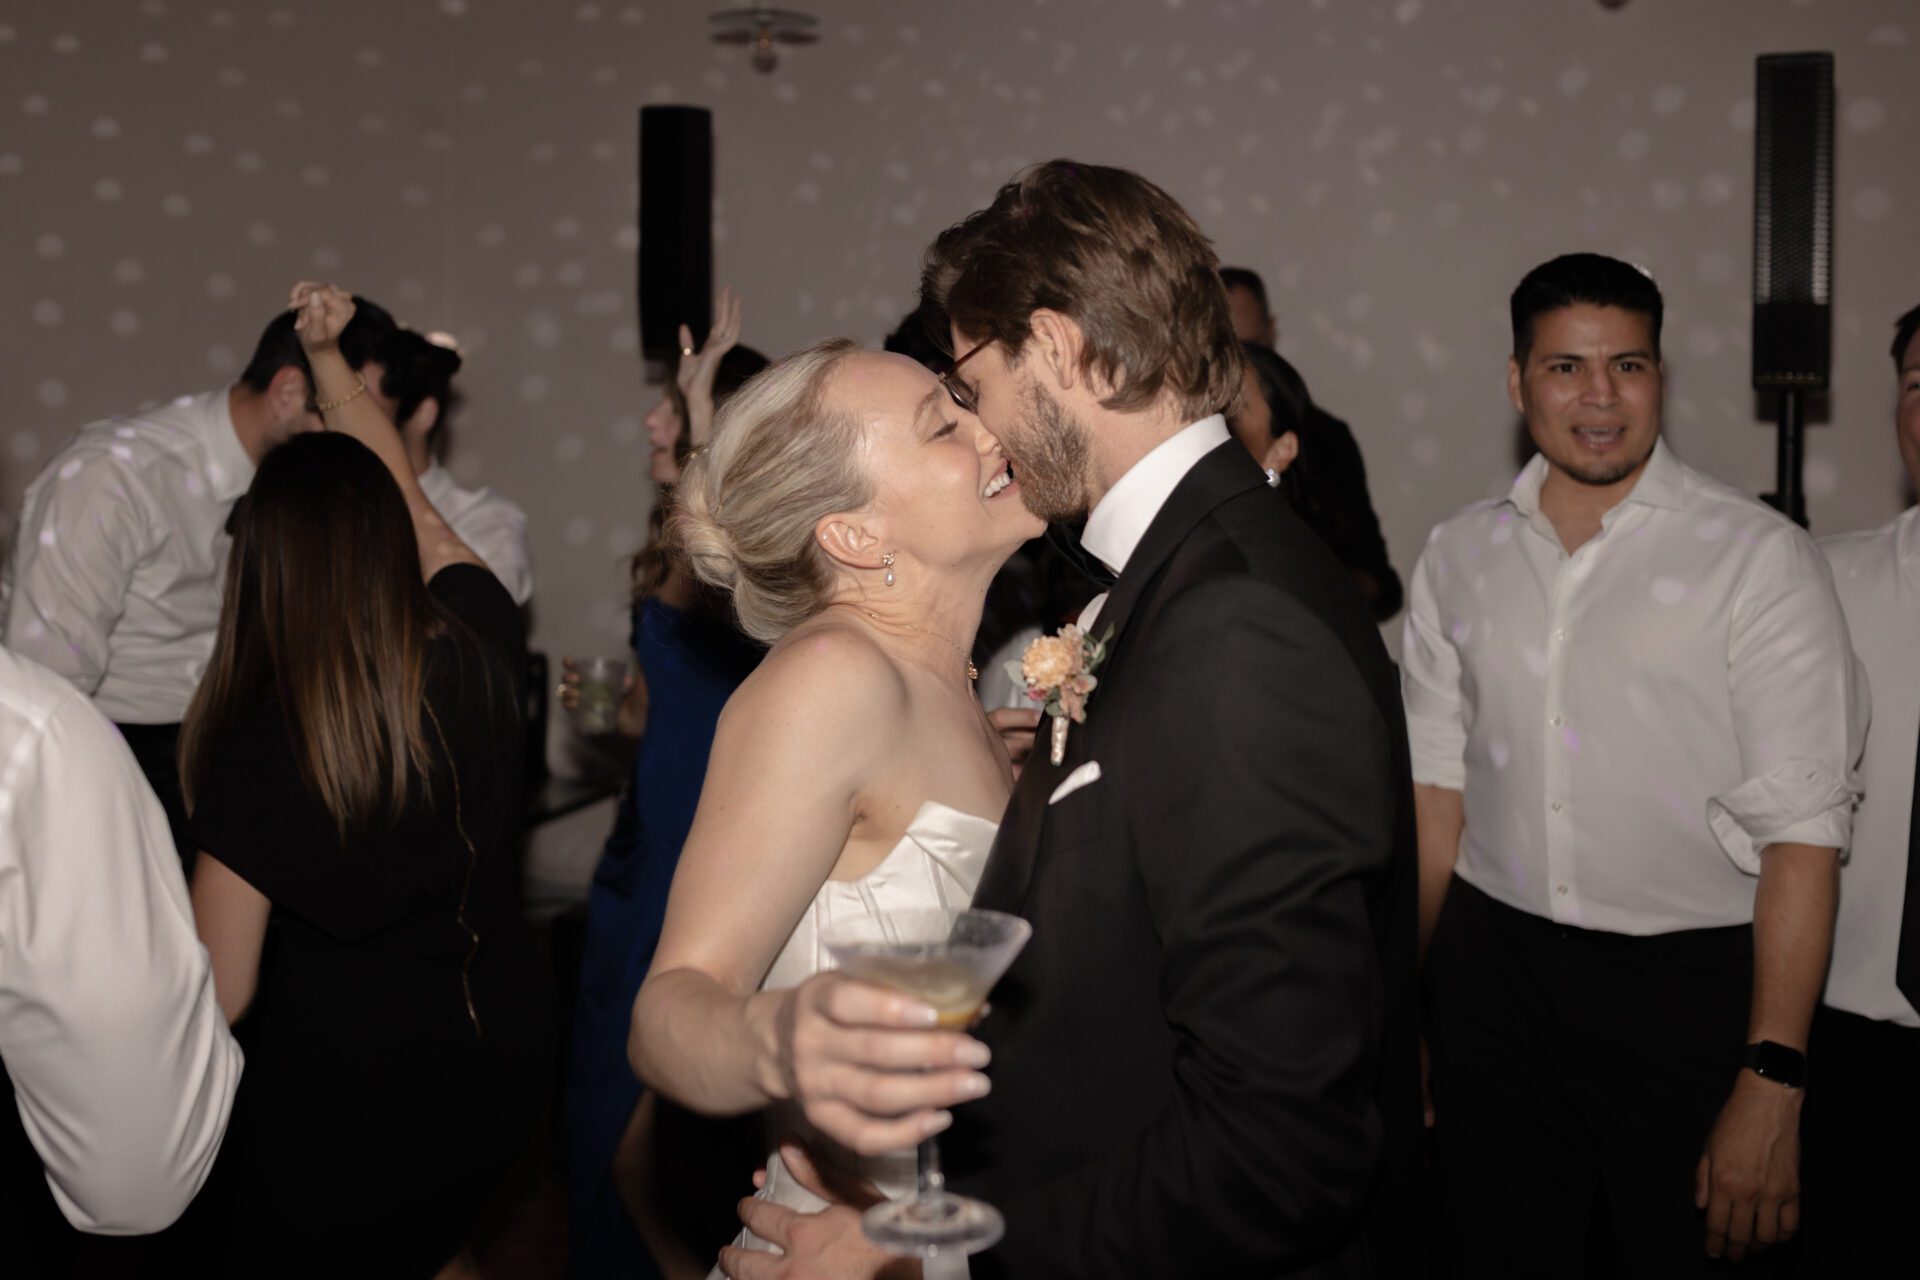 The bride and groom share a kiss at their luxury Italian wedding afterparty